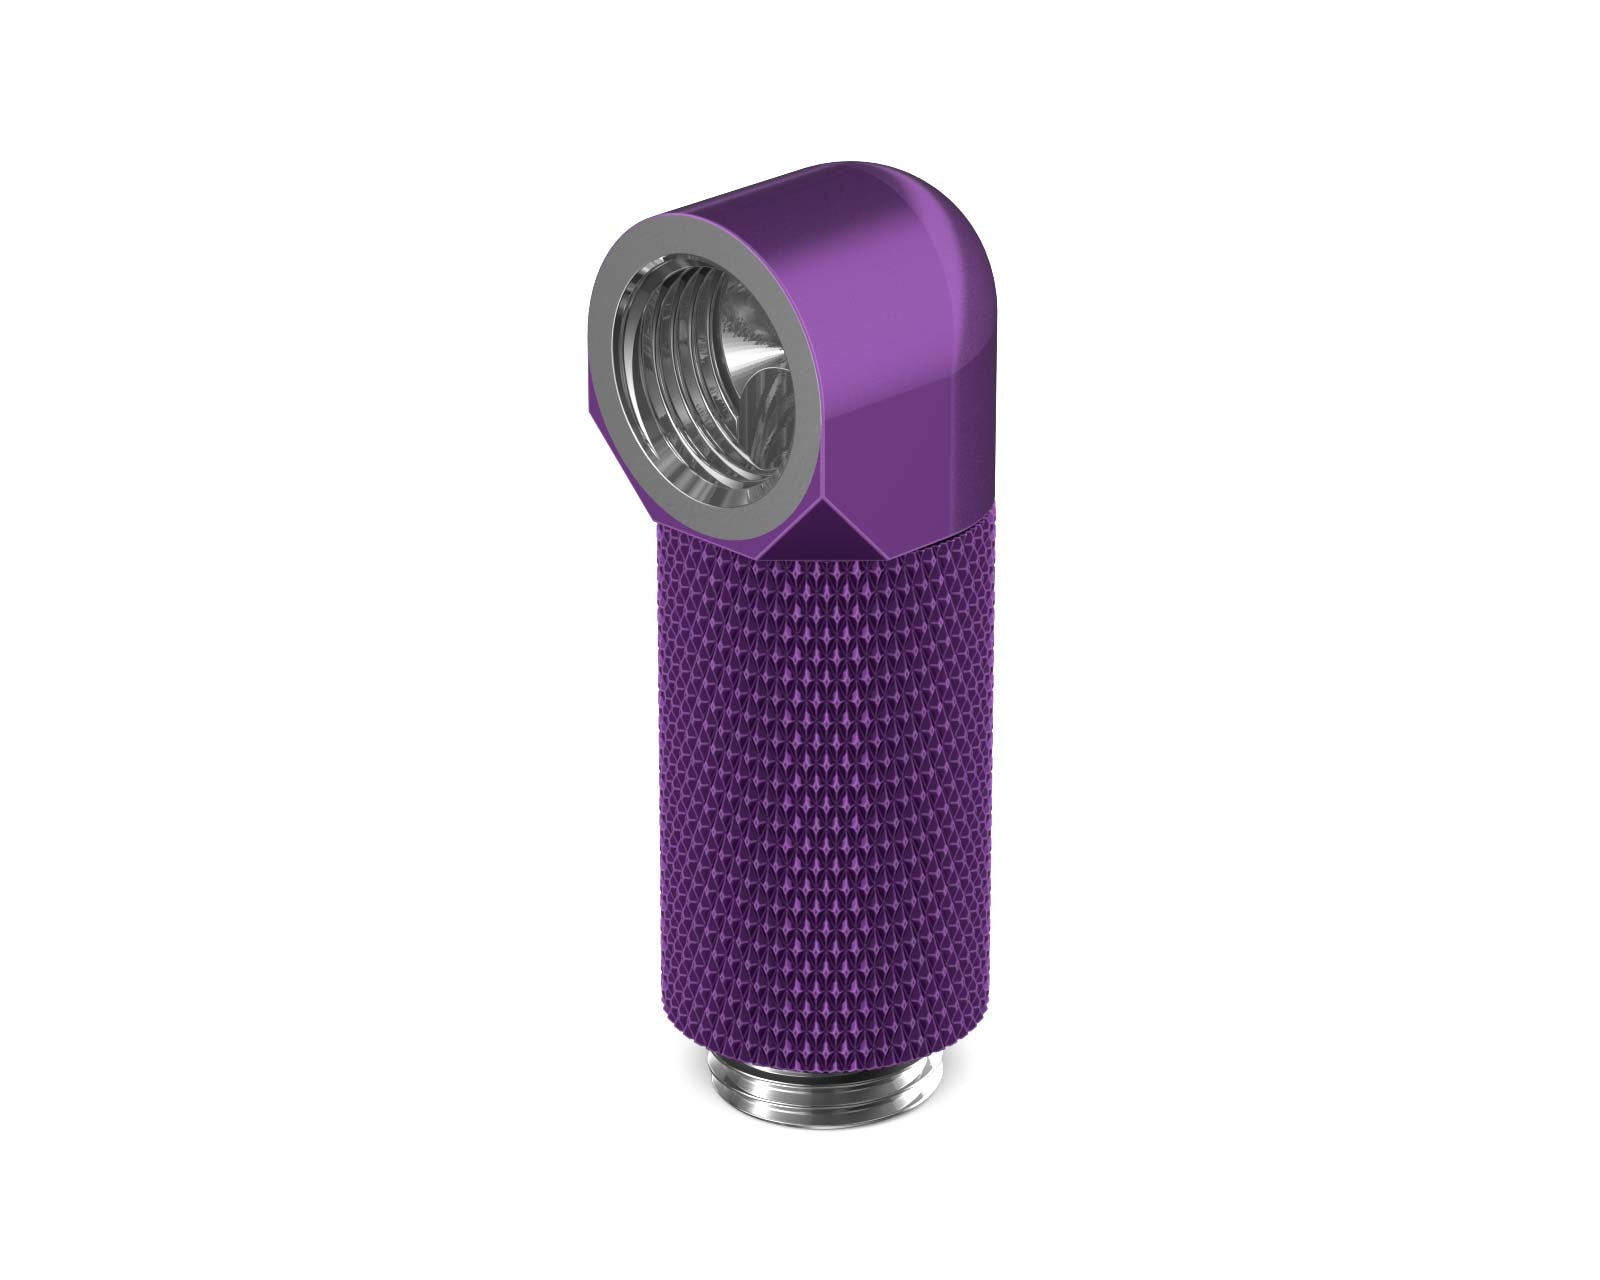 PrimoChill Male to Female G 1/4in. 90 Degree SX Rotary 30mm Extension Elbow Fitting - PrimoChill - KEEPING IT COOL Candy Purple